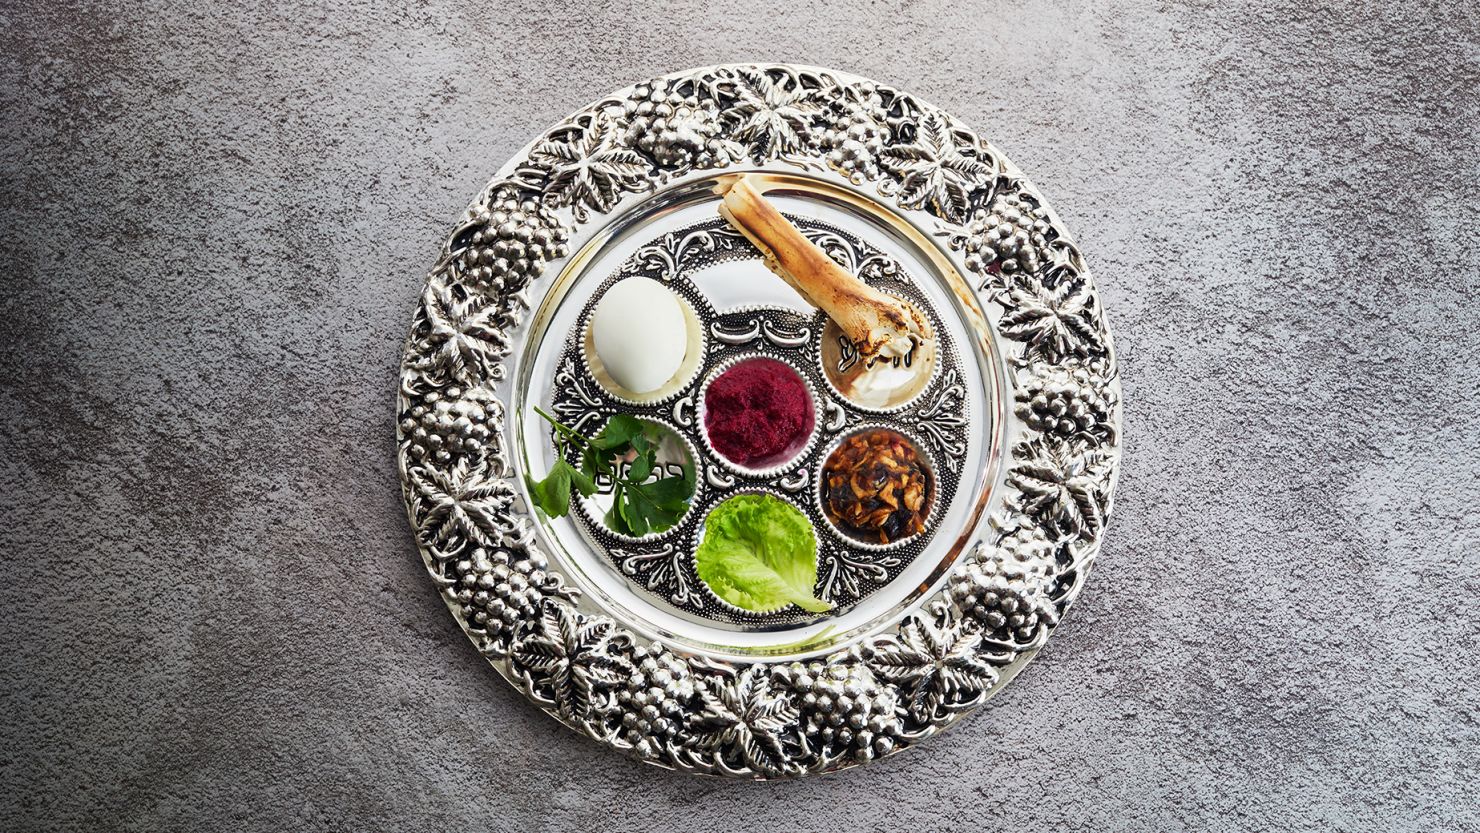 A silver engraved Passover Seder plate with horseradish in the center.